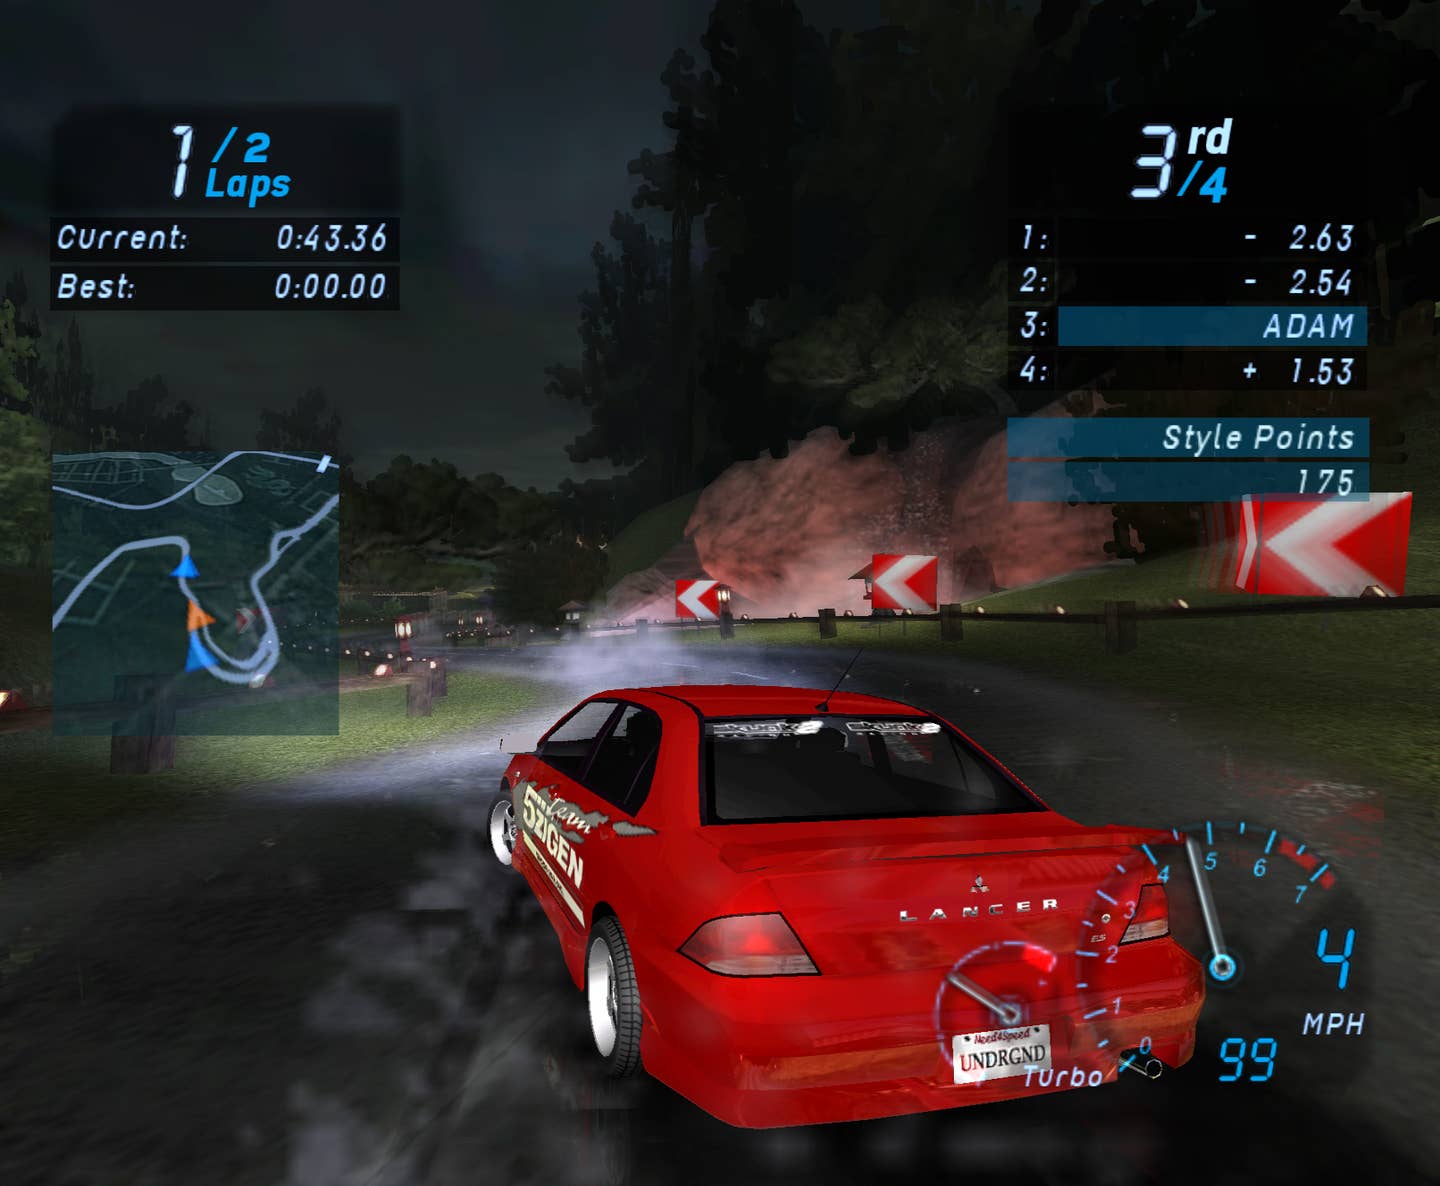 Name another game where you can drive a normal, not-Evo Mitsubishi Lancer? I'll wait.